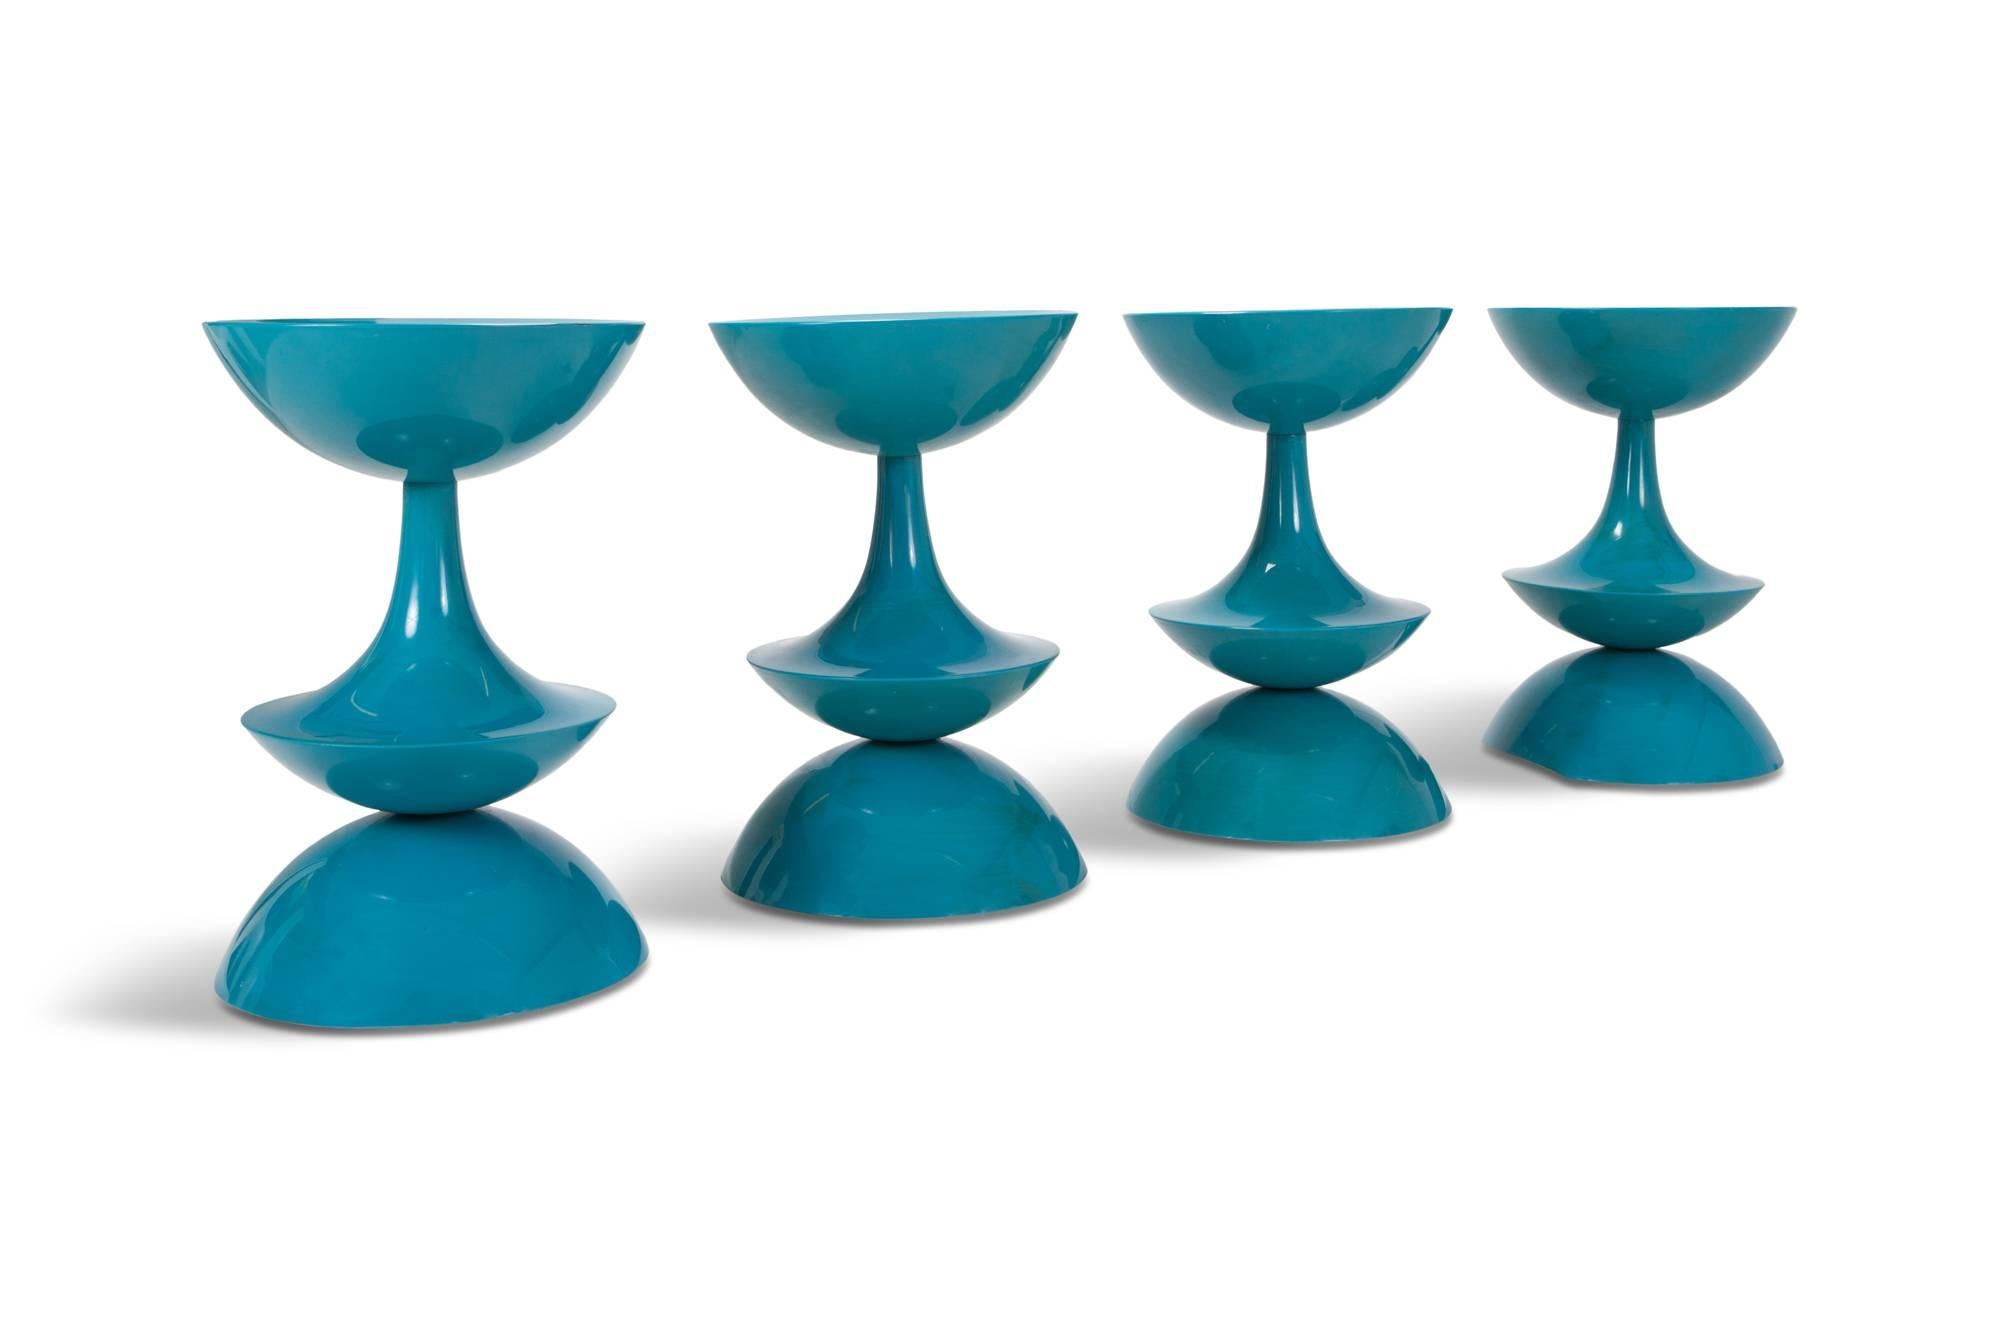 Blue set of four colored fibreglass bar stools: Model No. OD 5321 by Danish designer Nanna Ditzel.
These stools where made for Domus Danica (circa 1969) and only produced in limited numbers. The chairs have a very modern and futuristic appearance